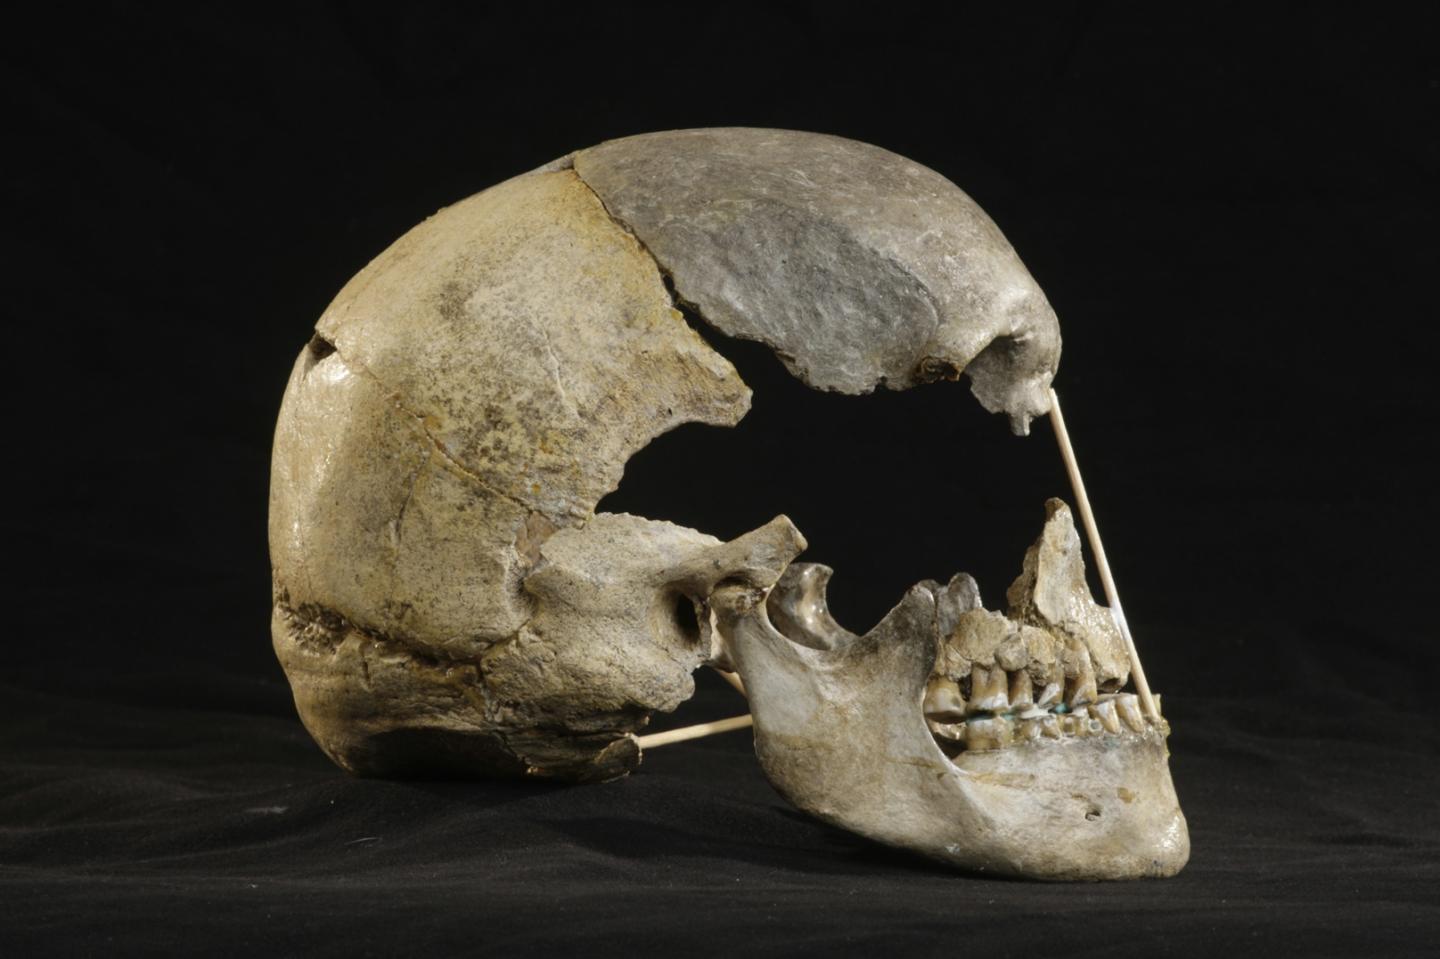 Skull lateral view